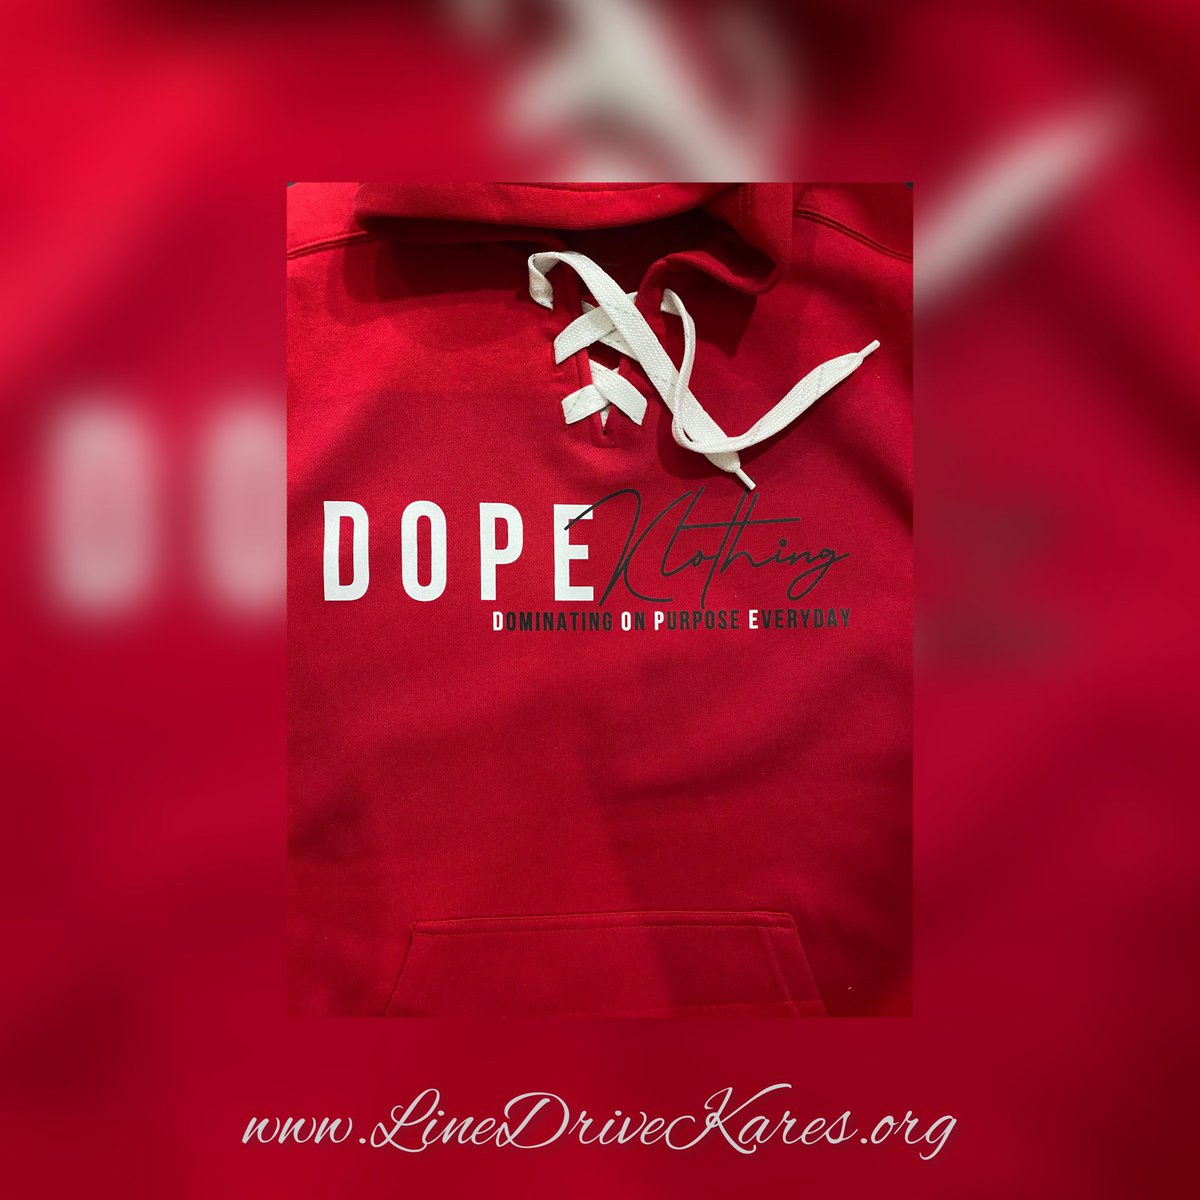 Join the movement | Support the youth | Stay DOPE

linedrivekares.org
Order here ⬆️⬆️⬆️⬆️

#explorepage #clothingbrand #blackclothingbrands #dopeklothing #summertimevibes #supportsmallbusiness #supportabusinesswithacause #blackclothingbrand #dominatingonpurposeeveryday